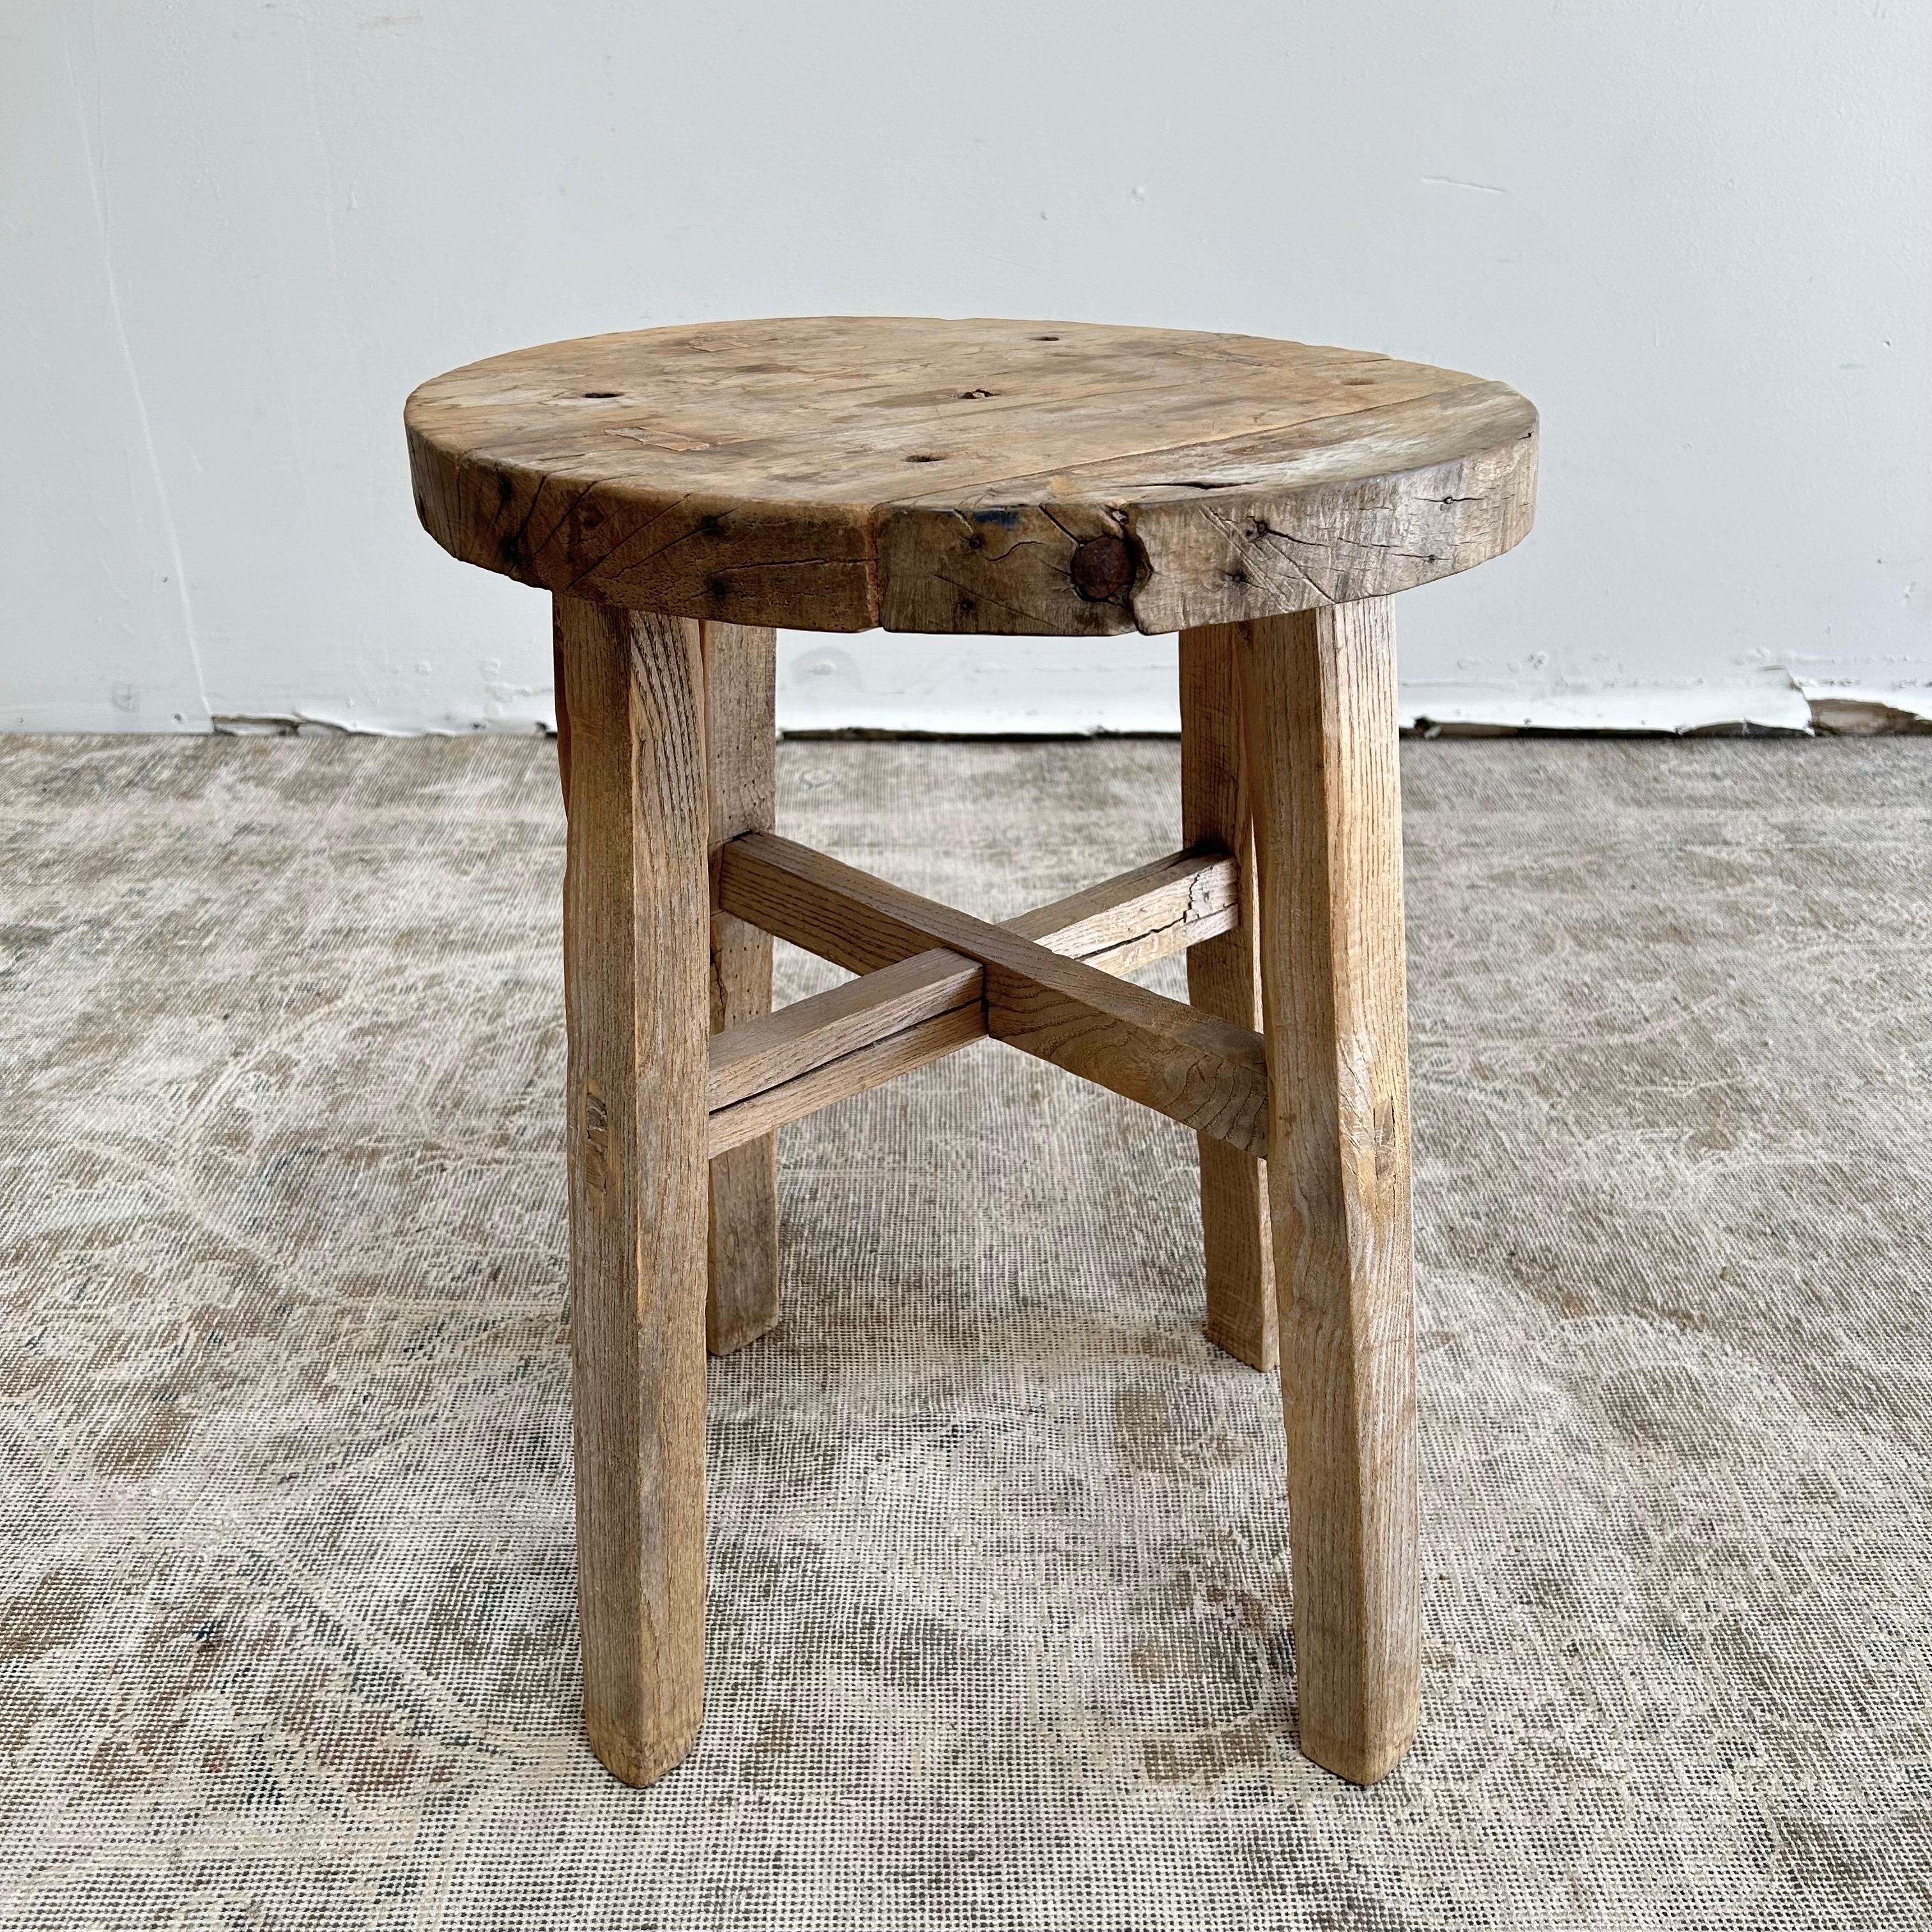 This vintage elm wood table is finished with medium stain. The table is solid and sturdy ready for everyday use. Use as a side table, stool, powder room to add vintage style to your home. One of a kind item.
Round elm table 18”rd. X 24”h.